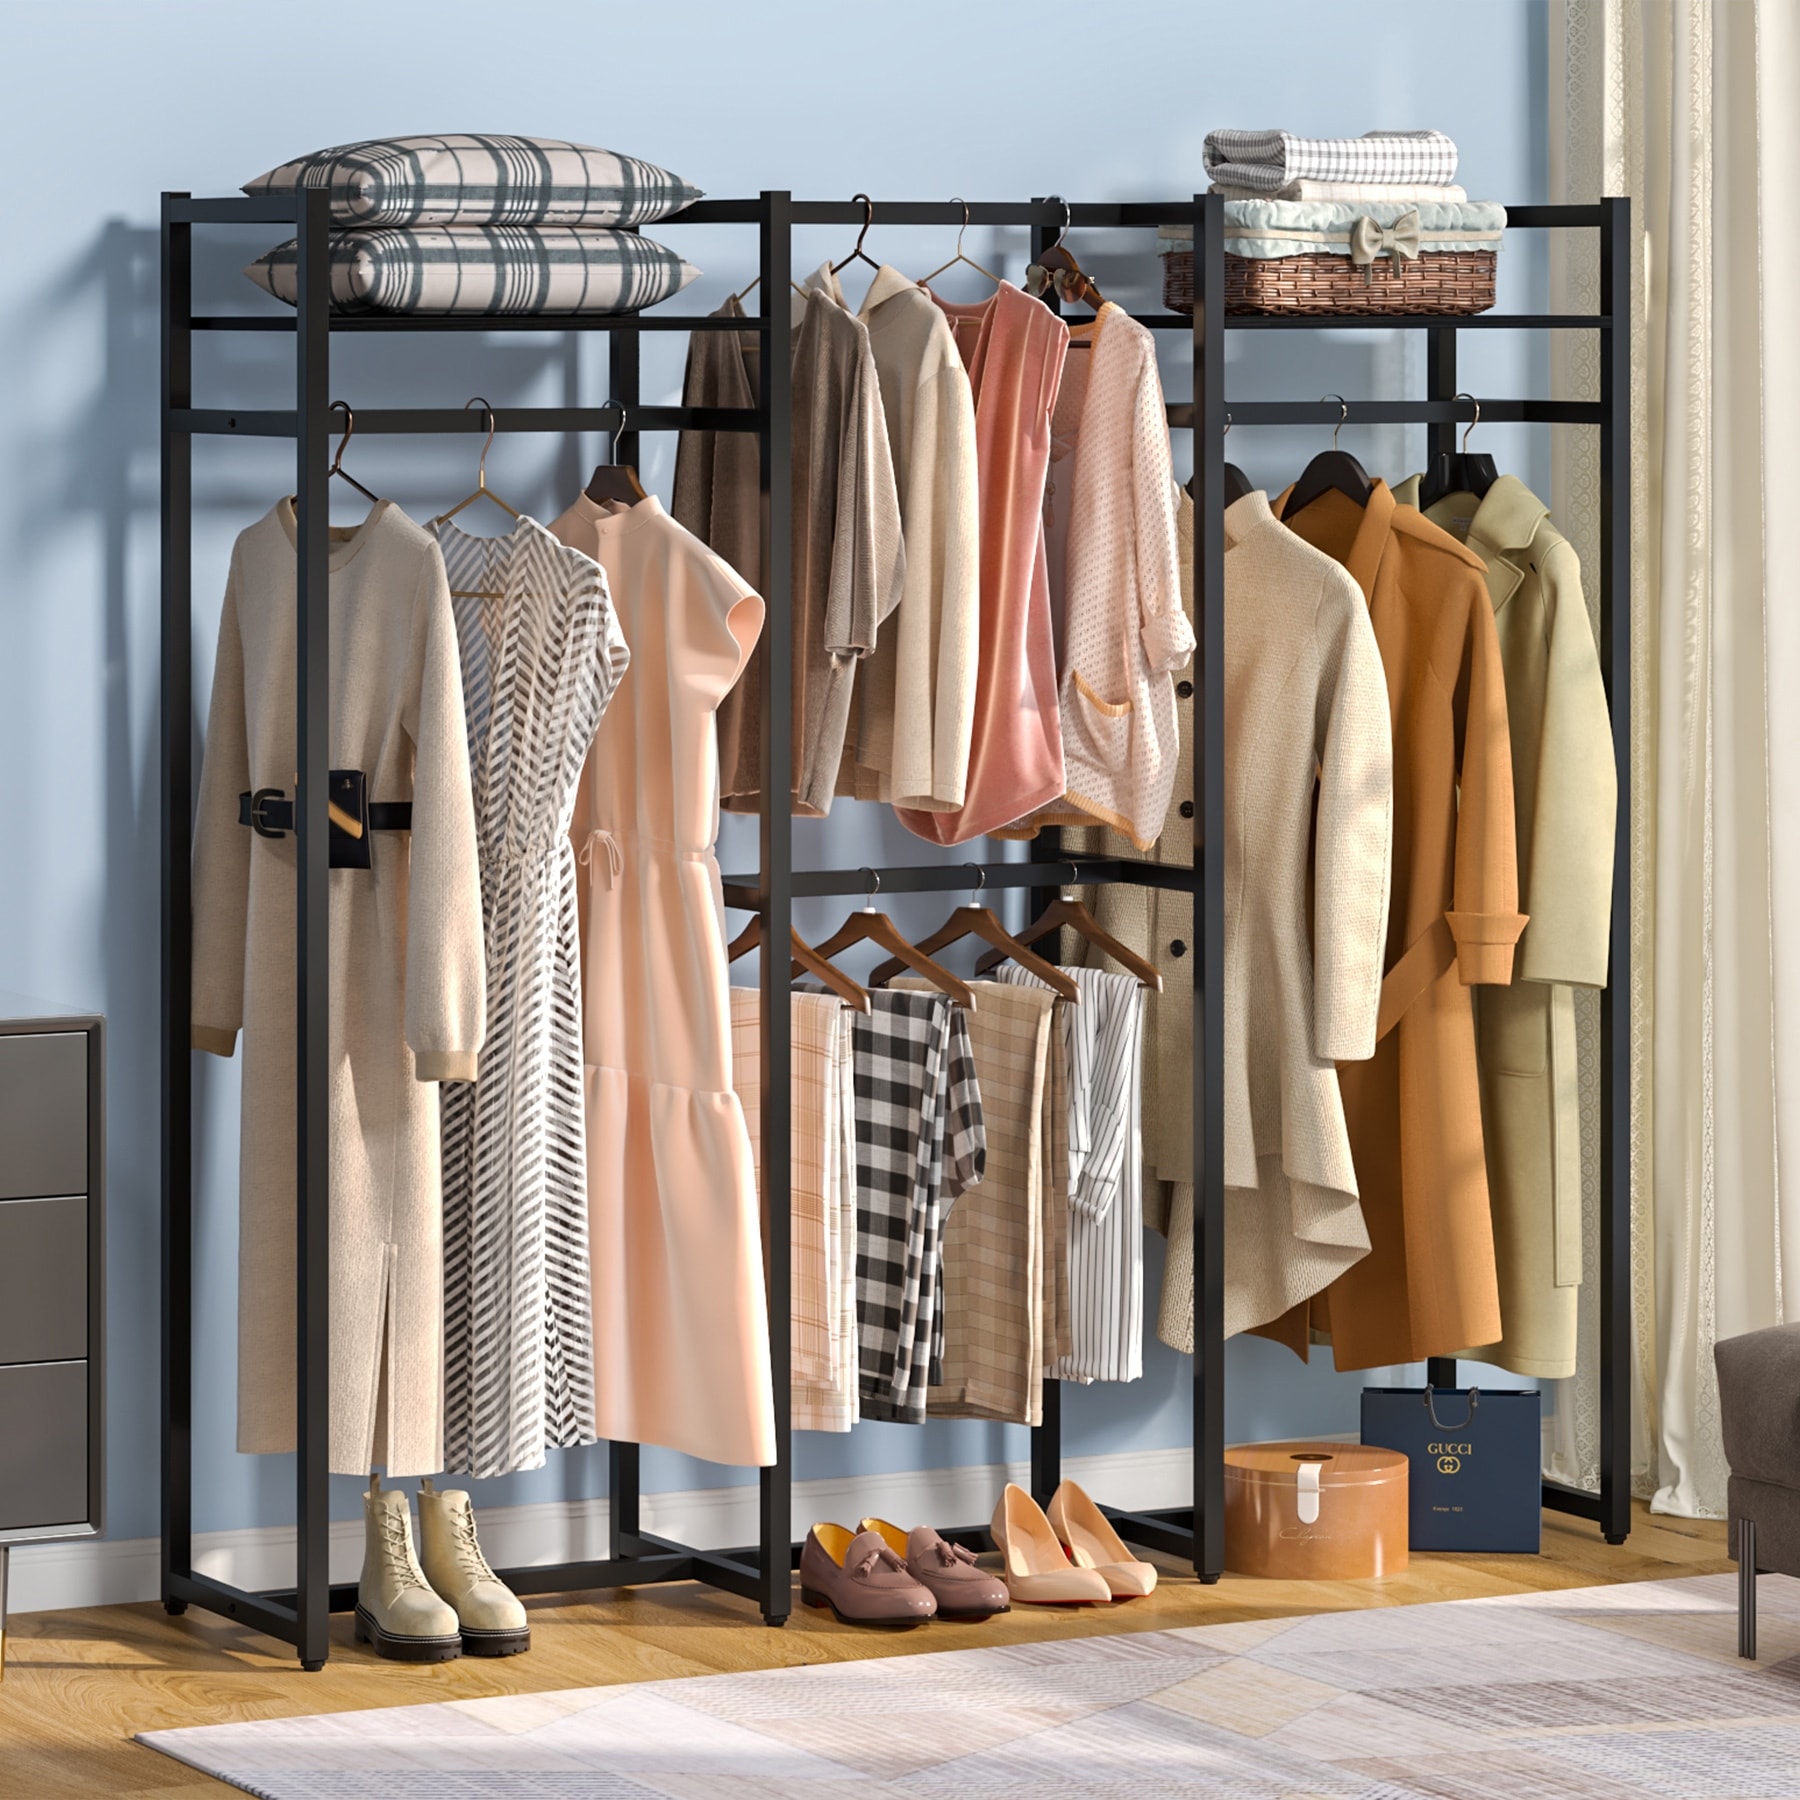 https://ak1.ostkcdn.com/images/products/is/images/direct/ad94be4eba094d5a4c0188cecb1bf4c1a22bc6b5/Garment-Rack-Heavy-Duty-Clothes-Rack-Free-Standing-Closet-Organizer-with-Shelves%2C-Large-Size-Storage-Rack-with-4-hanging-Rods.jpg